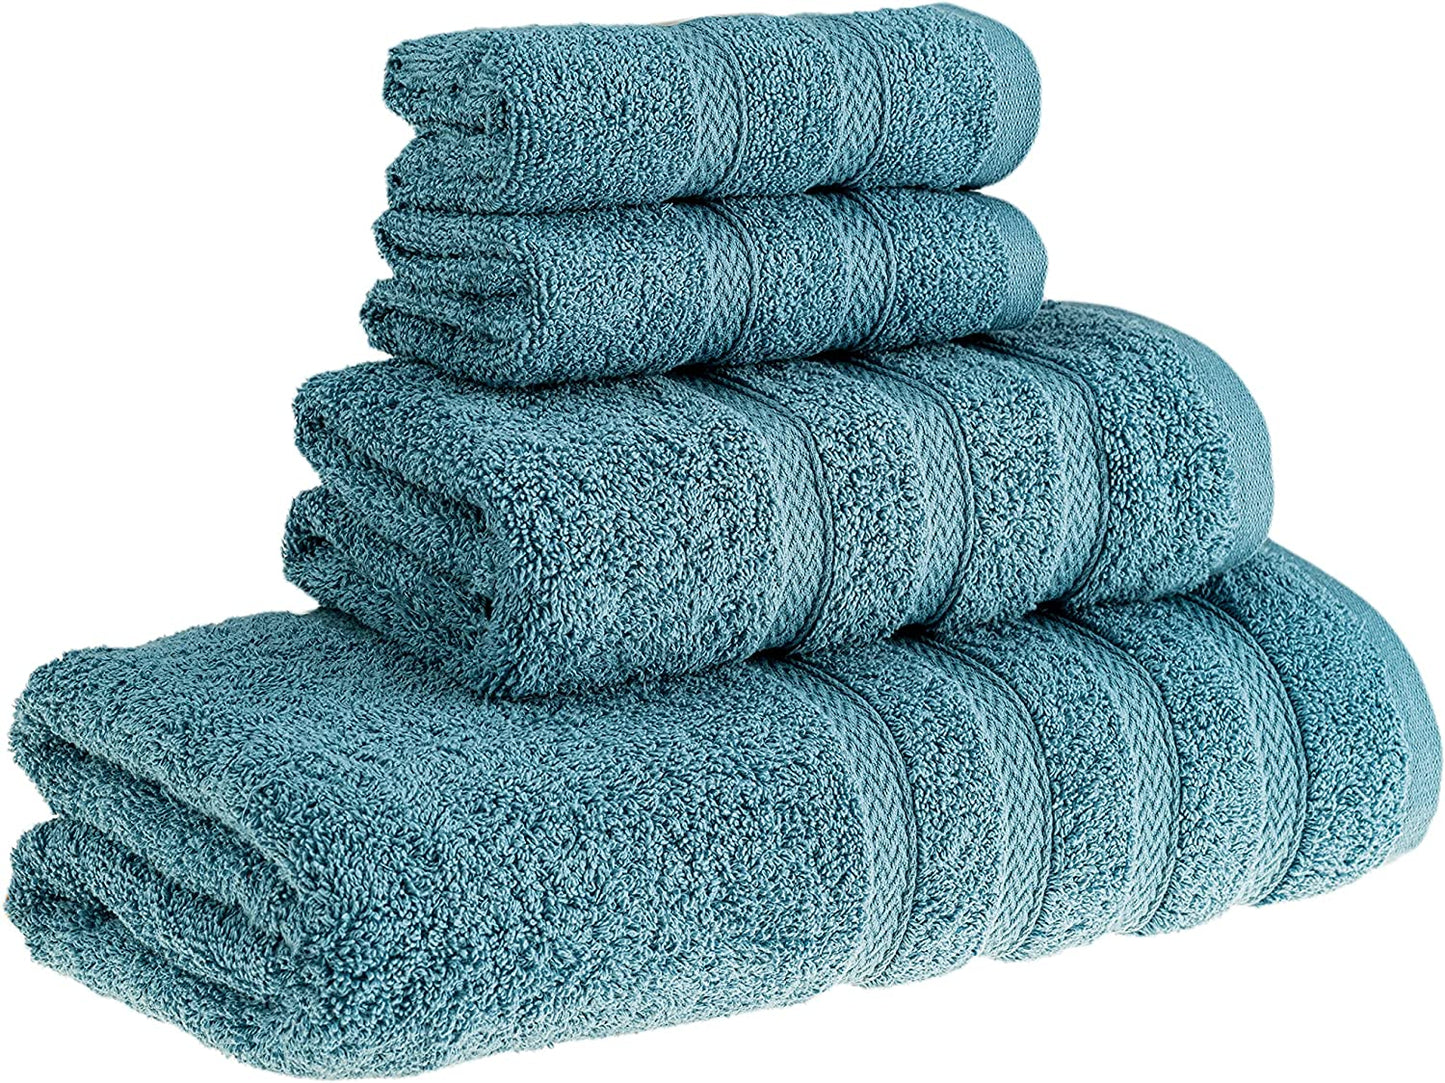 HALLEY Decorative Turkish Towels Set, 4 Pieces - Highly Absorbent & Fade Resistant Fabric, 100% Cotton - 1 Bath Towels, 1 Hand Towels, 2 Washcloths - Turquaz